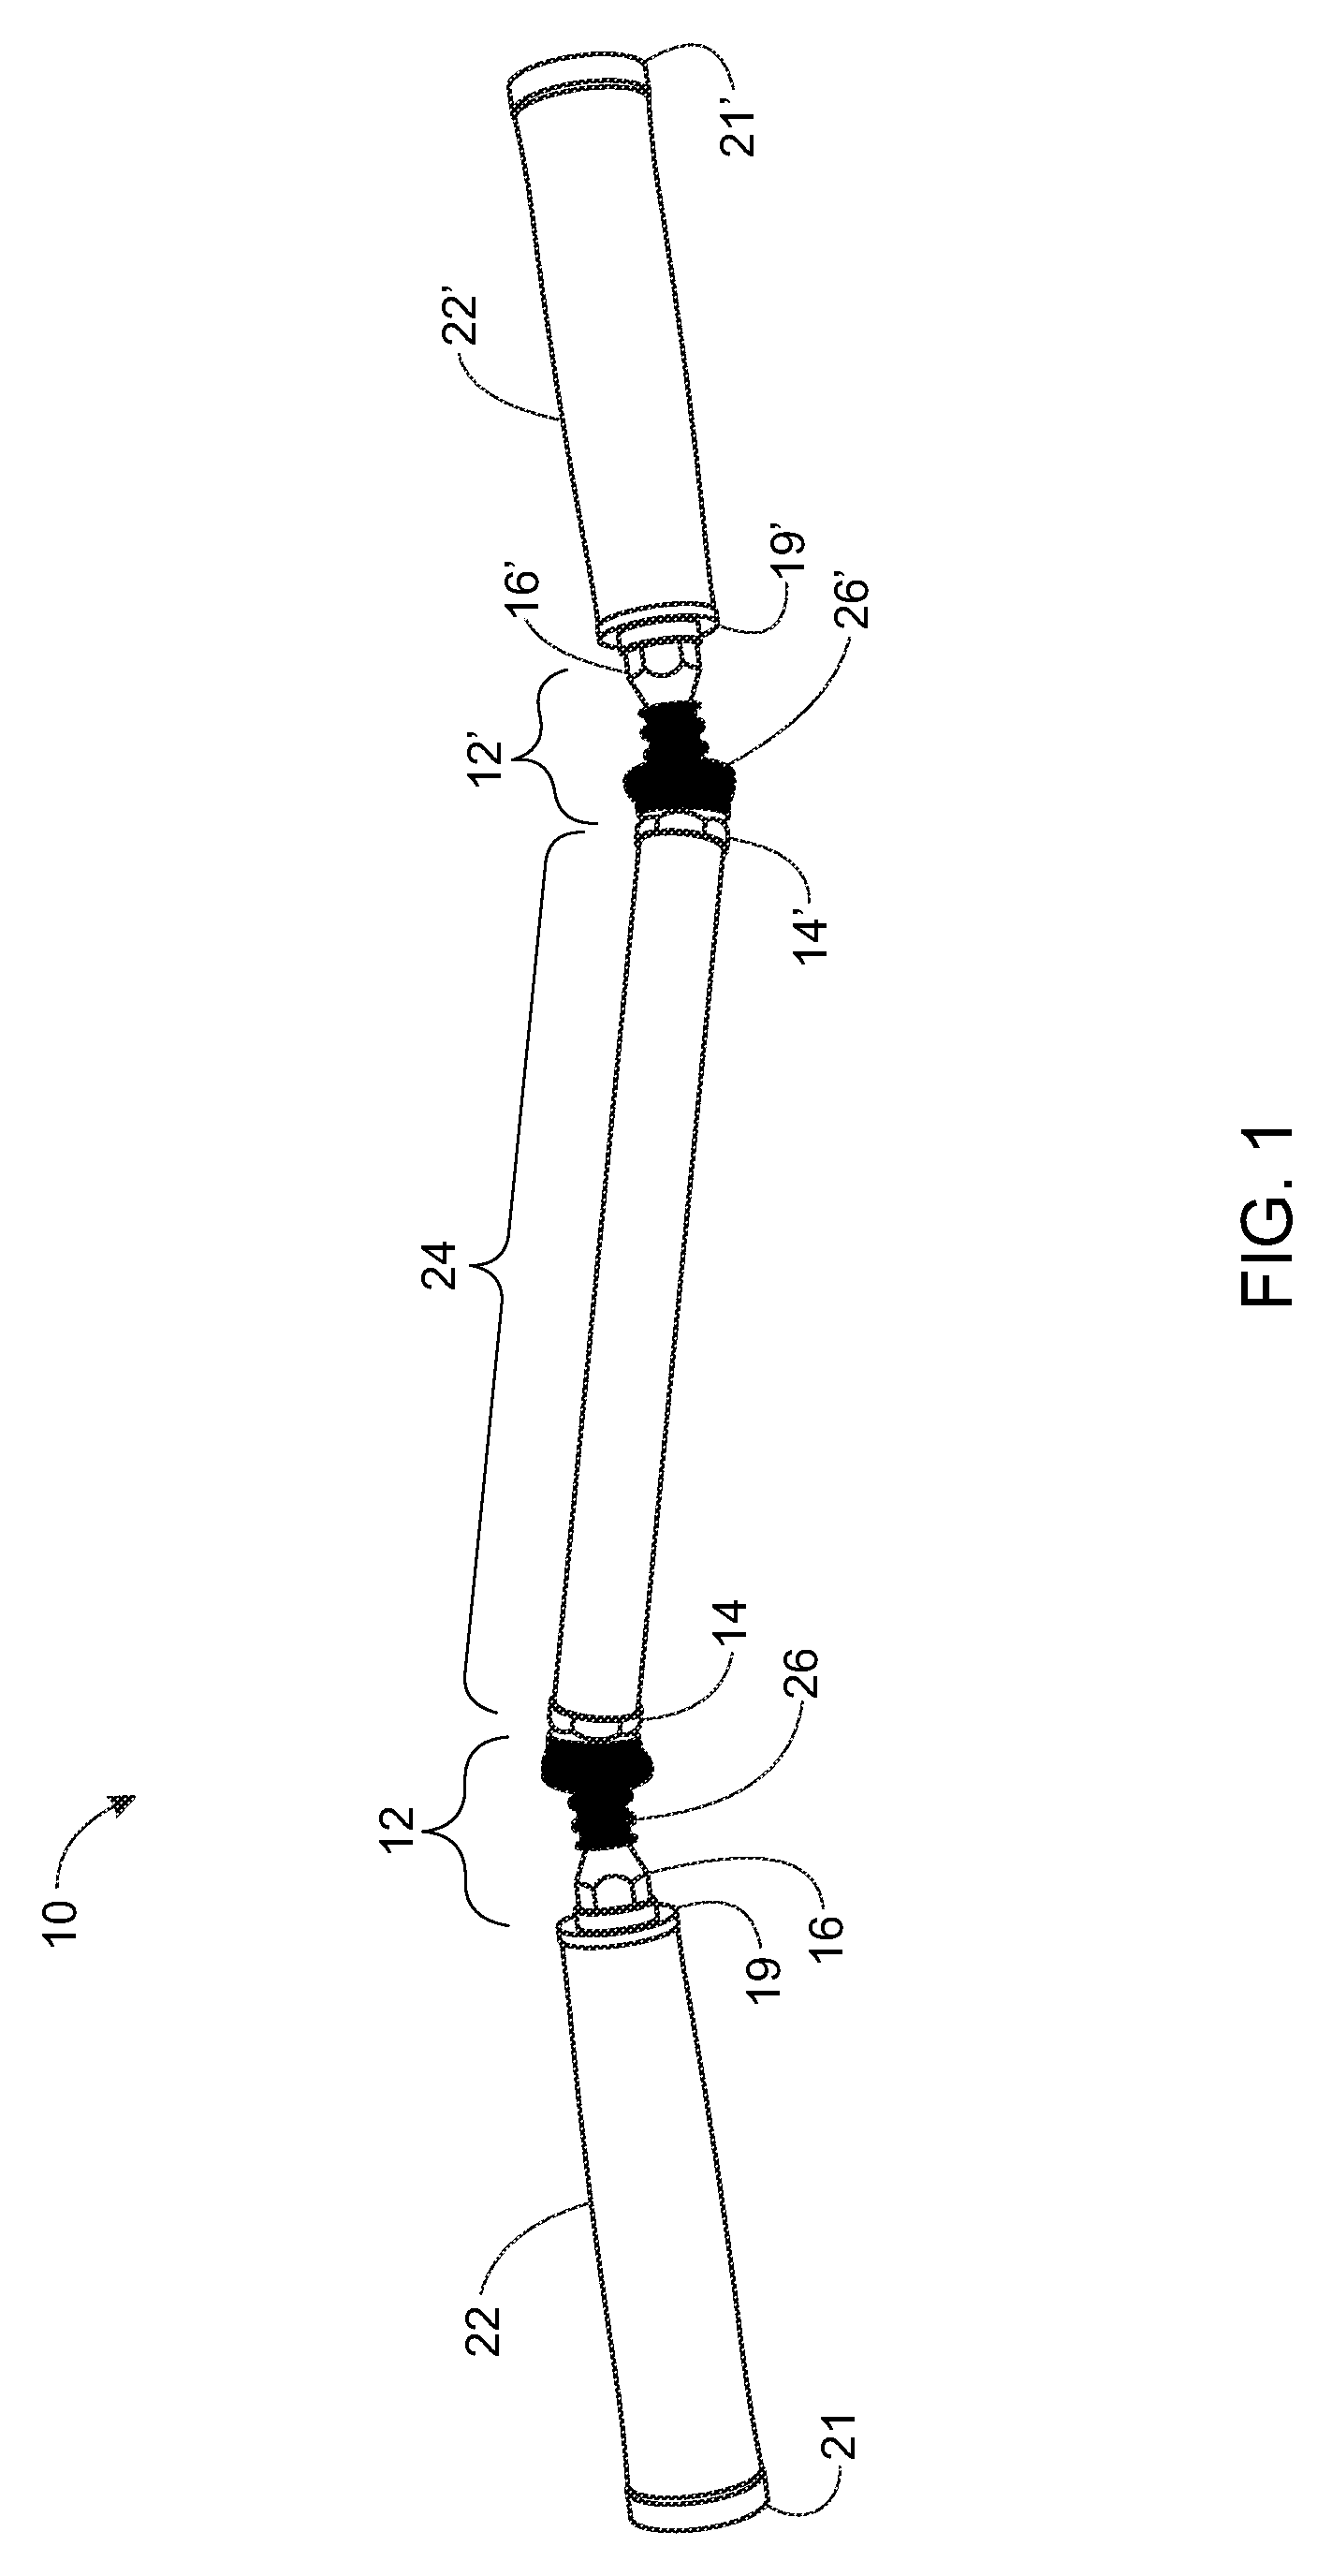 Ergonomic rotational muscle stretching device and method